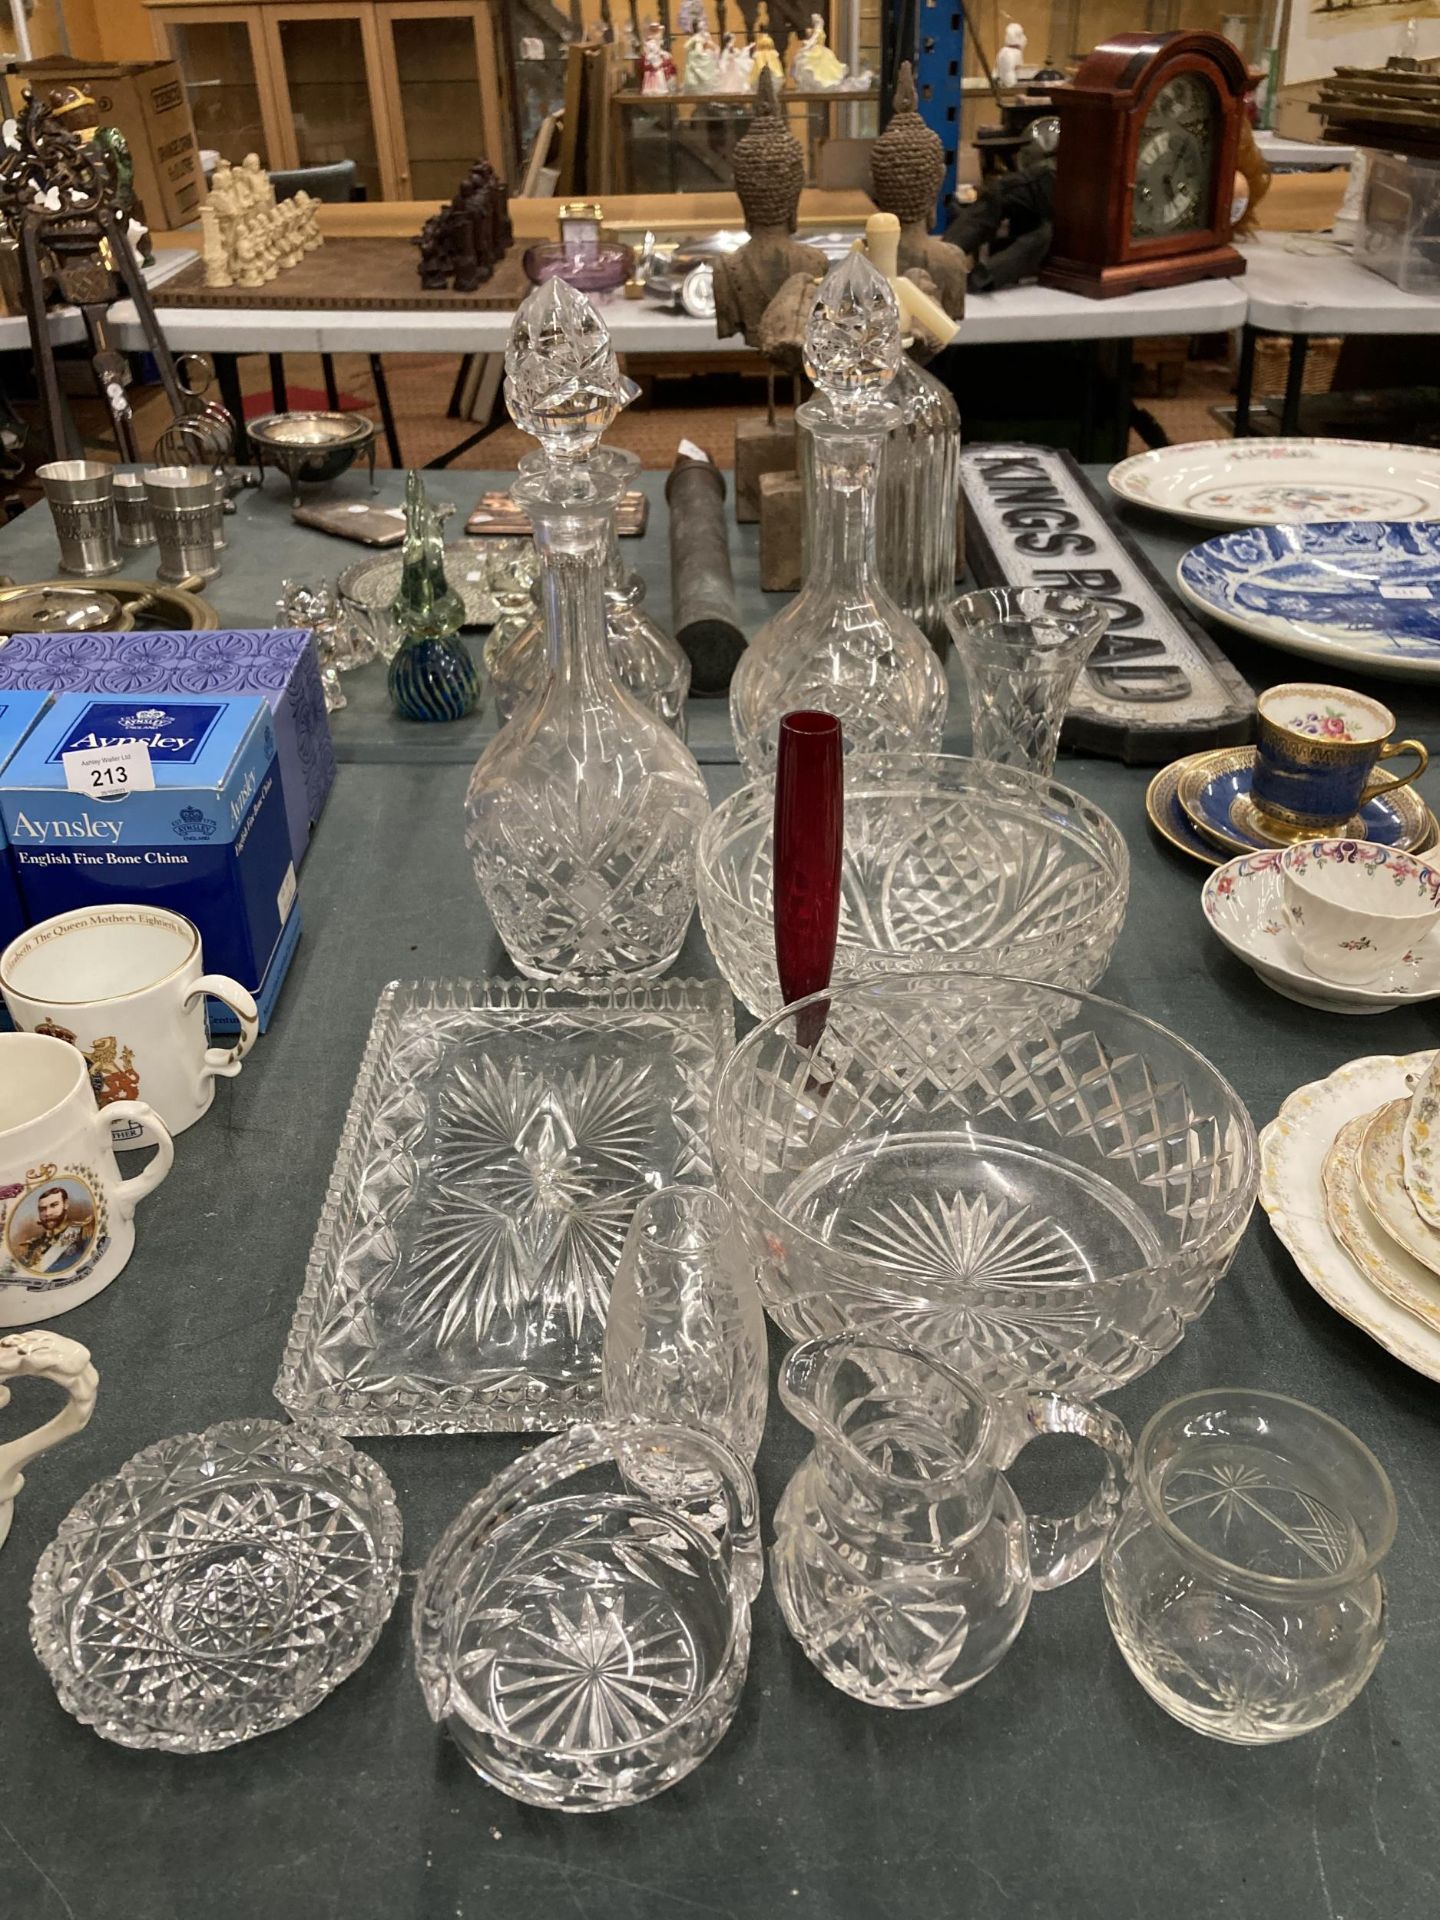 A COLLECTION OF CUT GLASS ITEMS - DECANTERS, BOWLS ETC